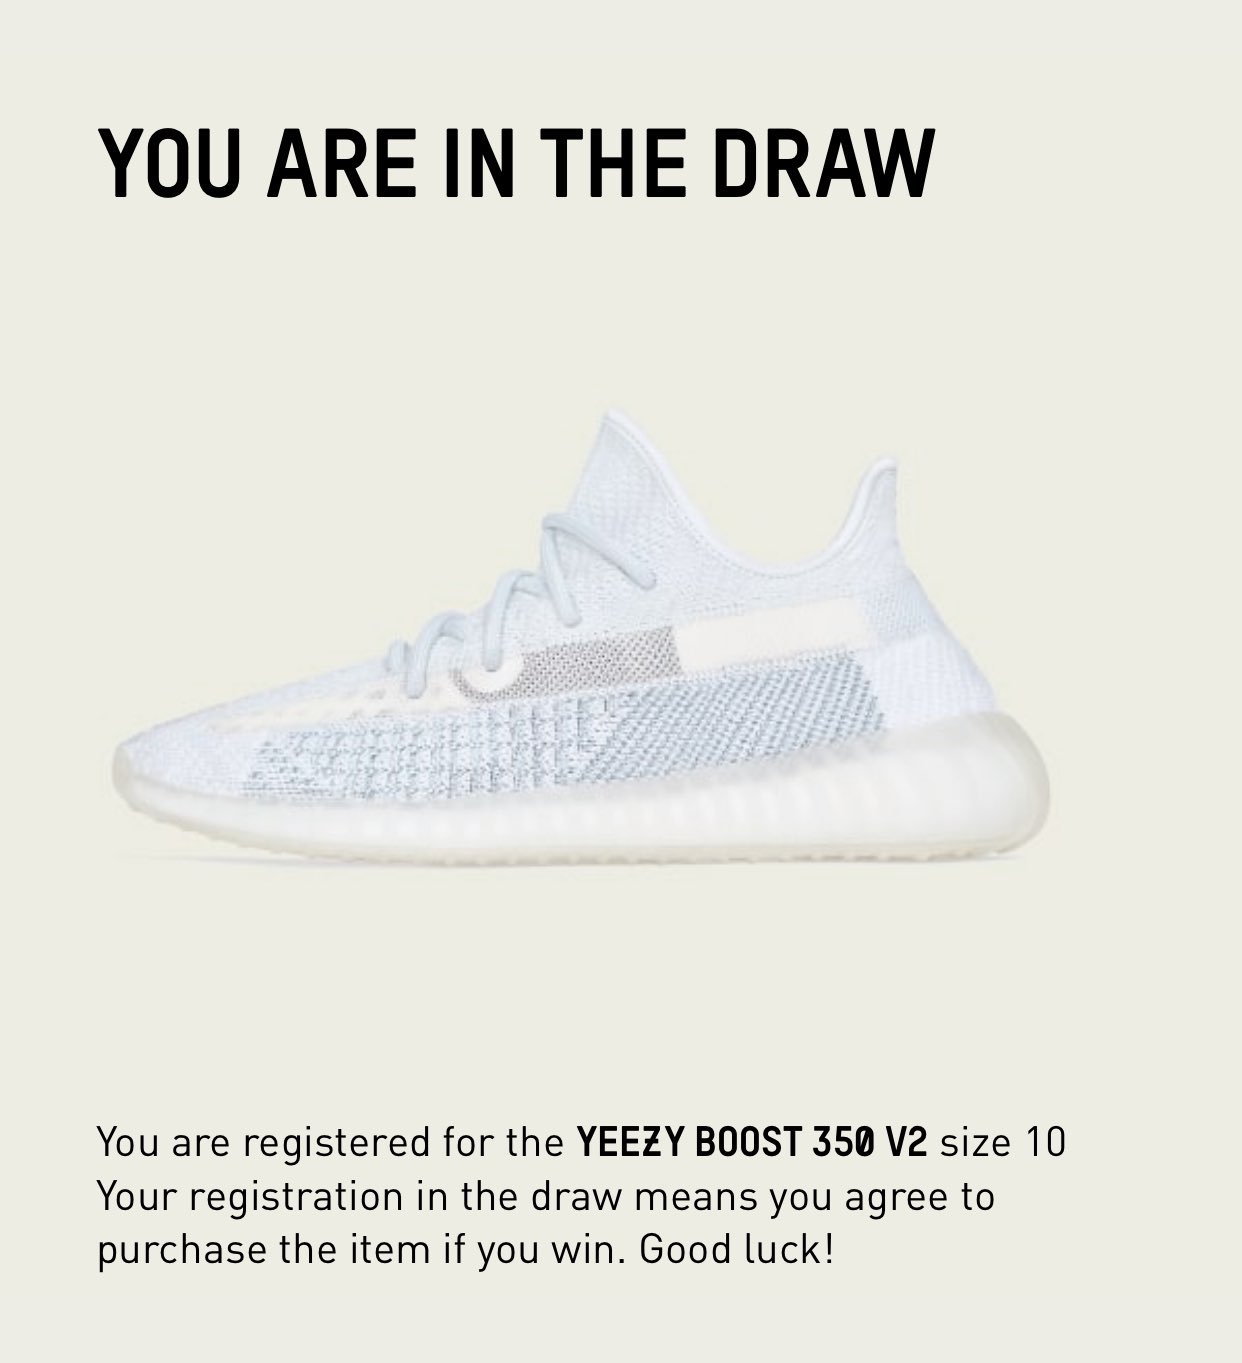 Melancolía Egipto Gastos SingleStopCop on Twitter: "Go enter the draw in the Adidas App for Yeezy  Boost 350 V2 Cloud White if you haven't done it yet. Exclusive release on #Adidas  app only. Available in